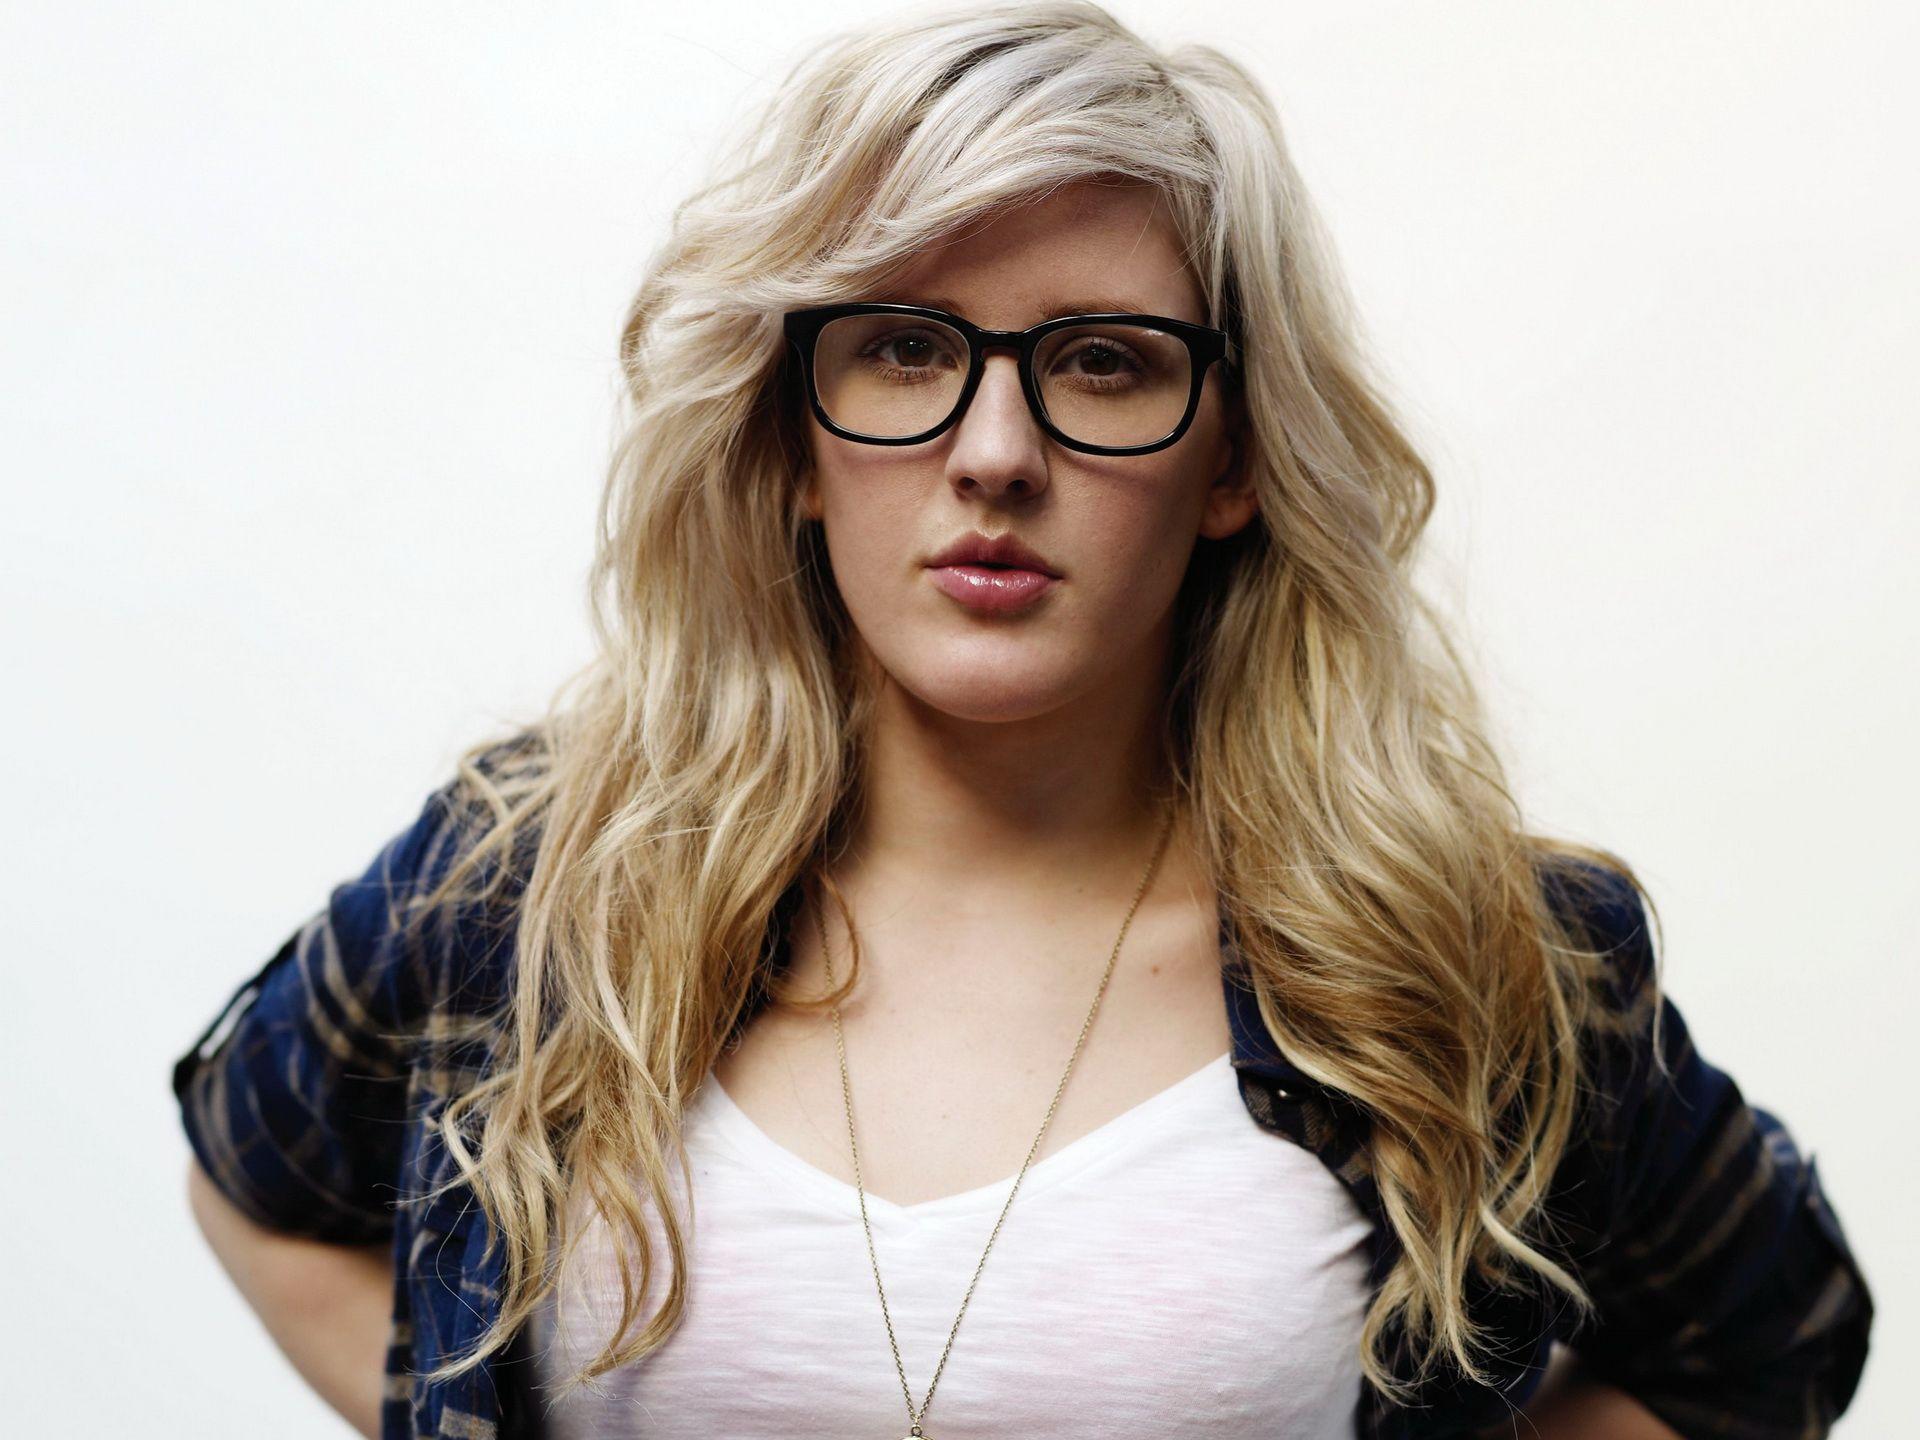 Ellie Goulding Wallpaper High Resolution and Quality Download